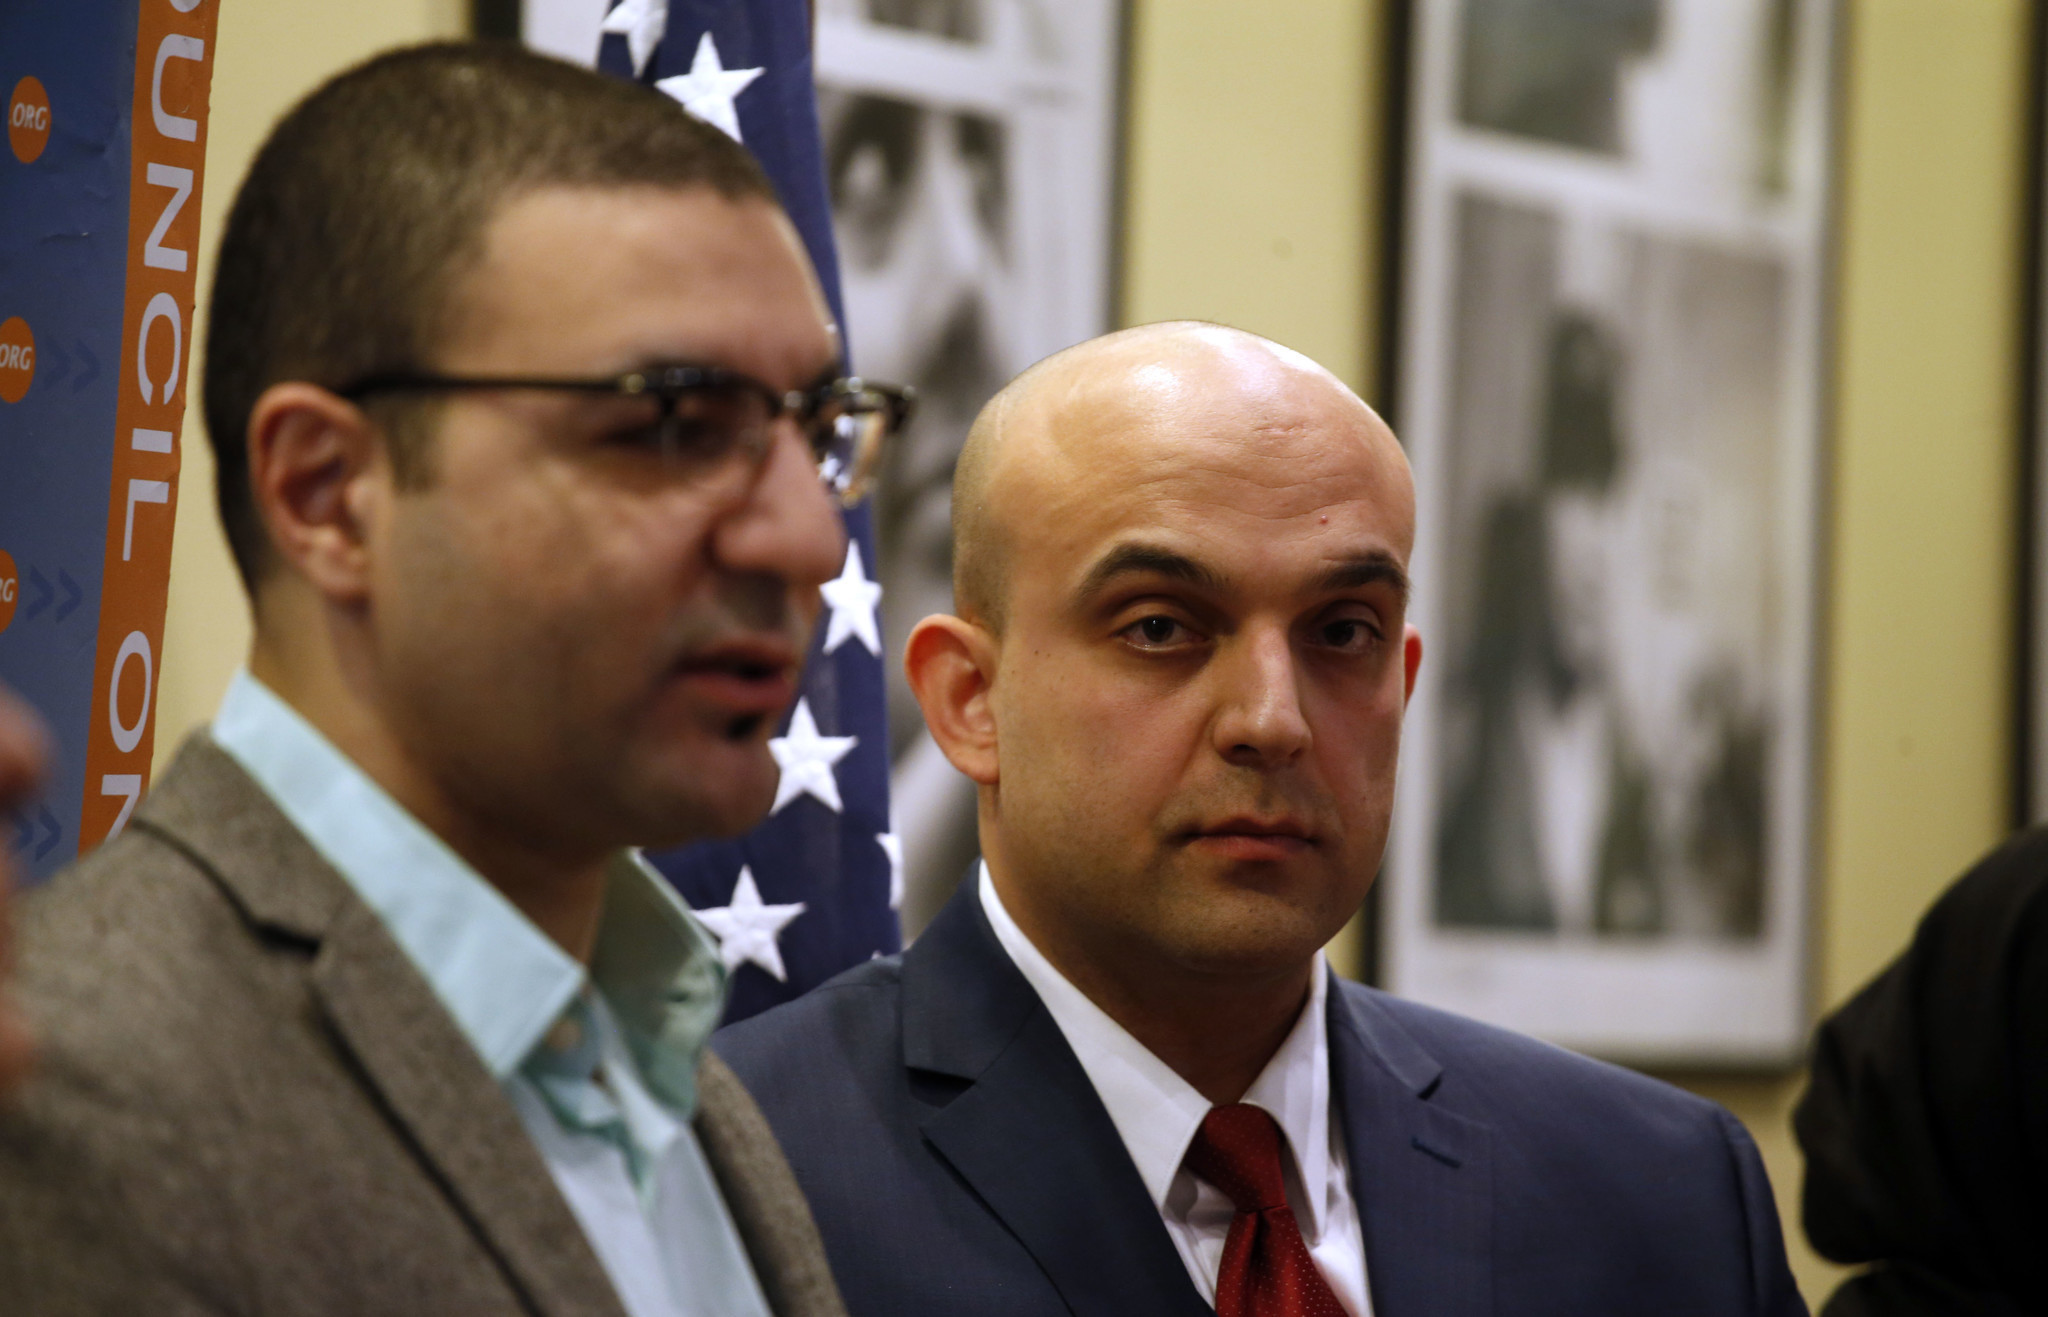 Ex-North Chicago cop sues, says he was harassed, then fired, for being Muslim